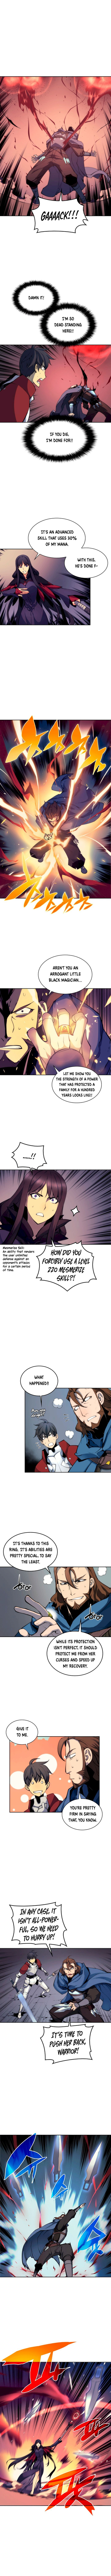 Overgeared - Chapter 6 Page 3